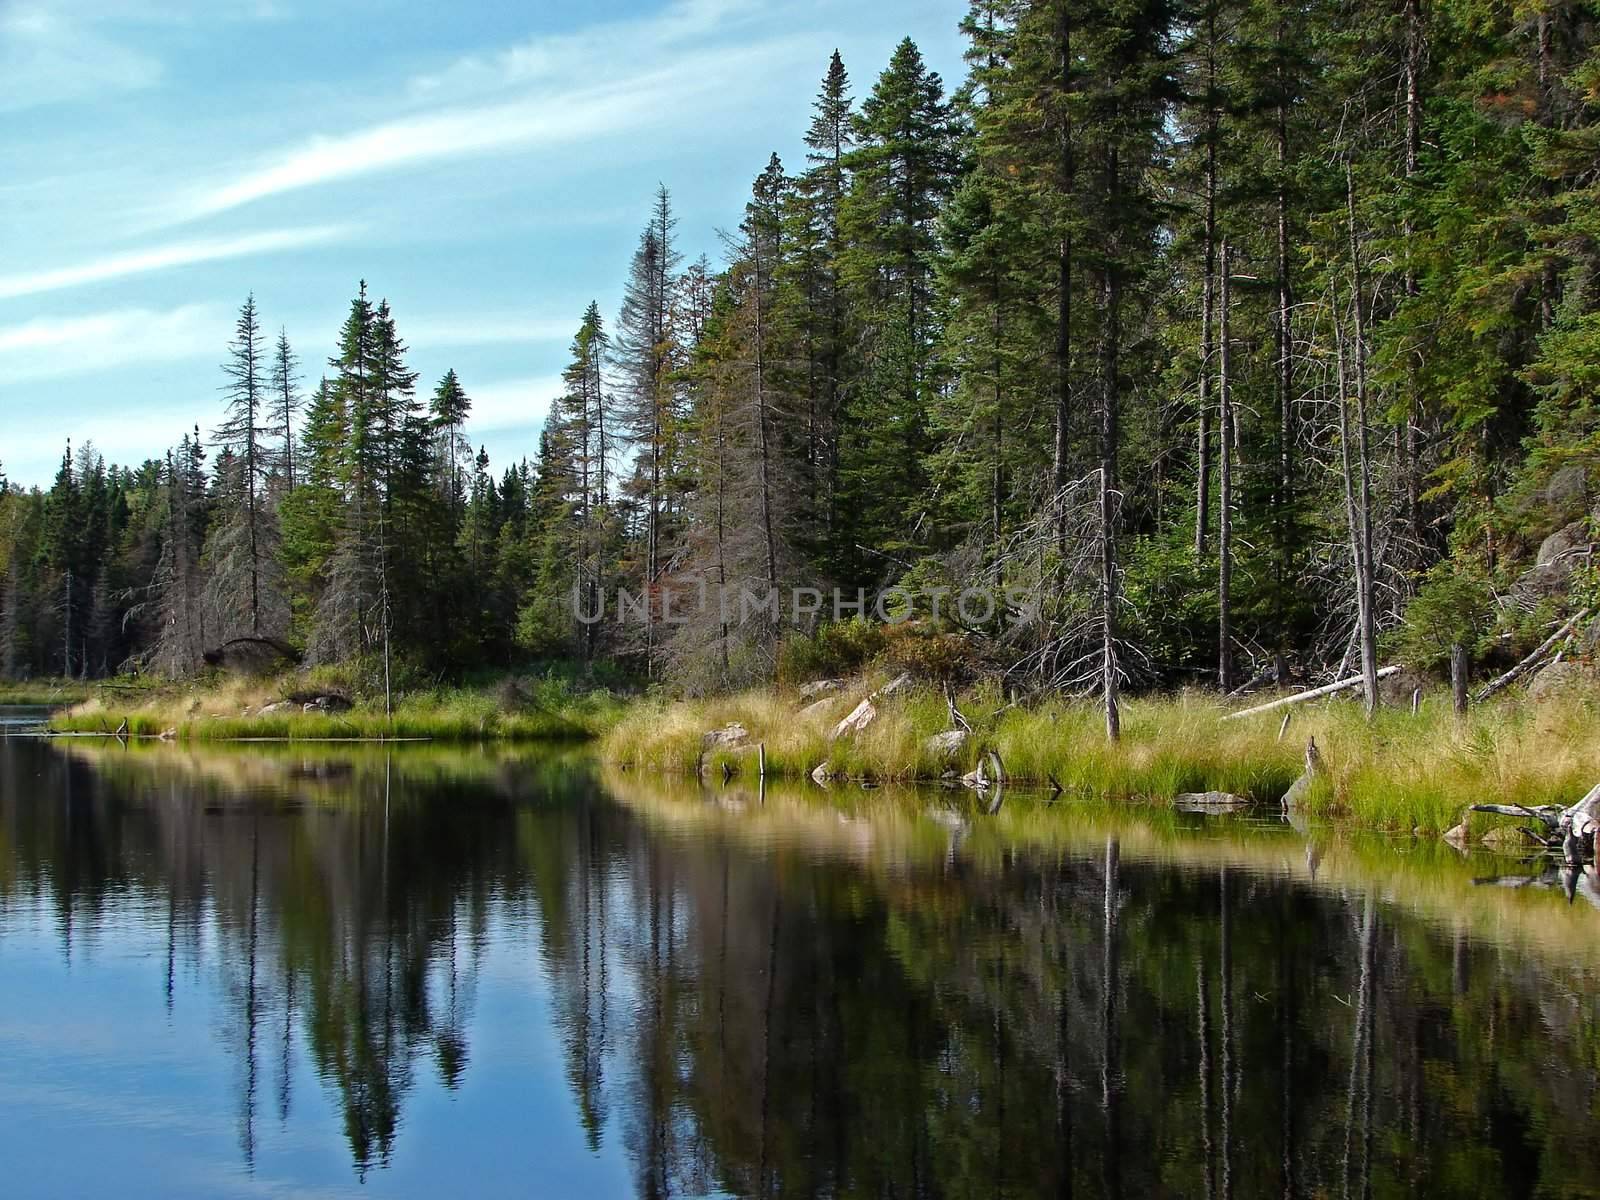 Superb Northern lake with calm deep blue waters reflecting the sky and the coniferous forest.